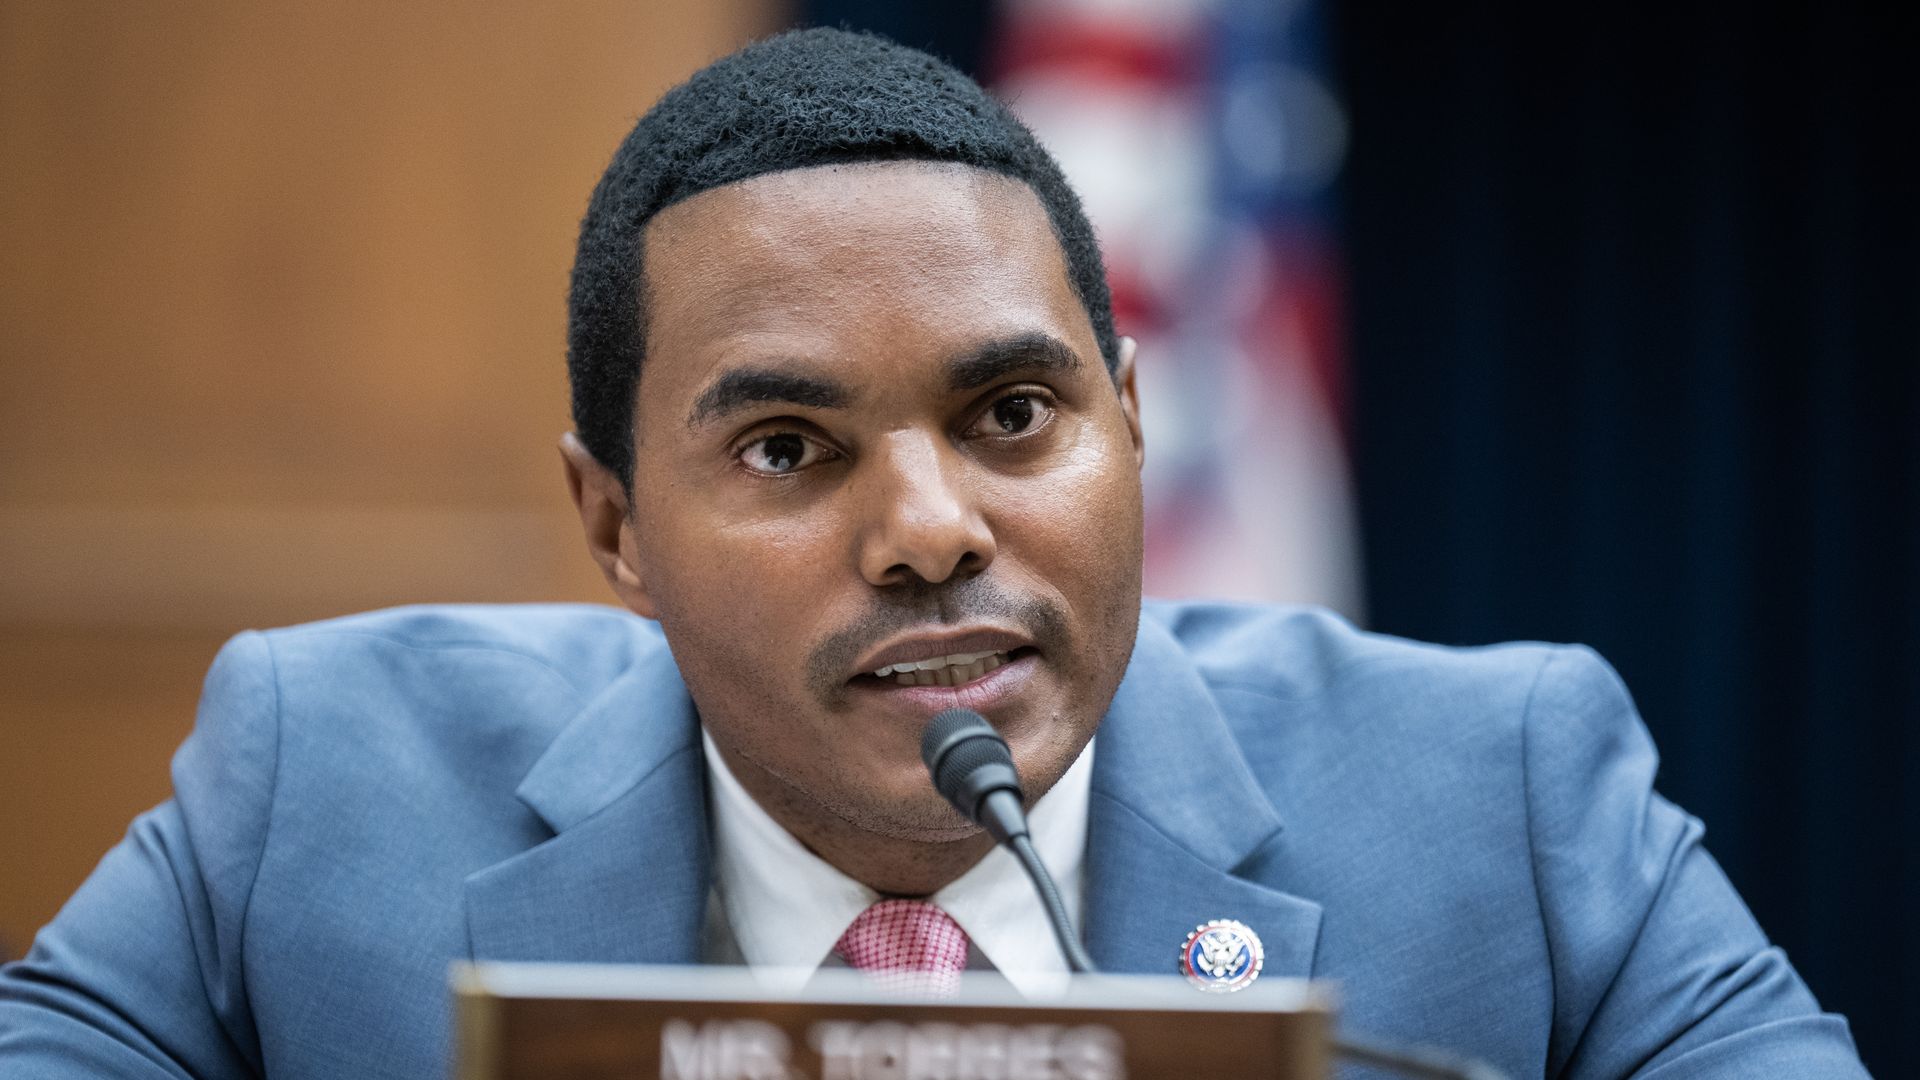 Rep. Ritchie Torres, wearing a blue suit and speaking into a microphone on a committee dais.